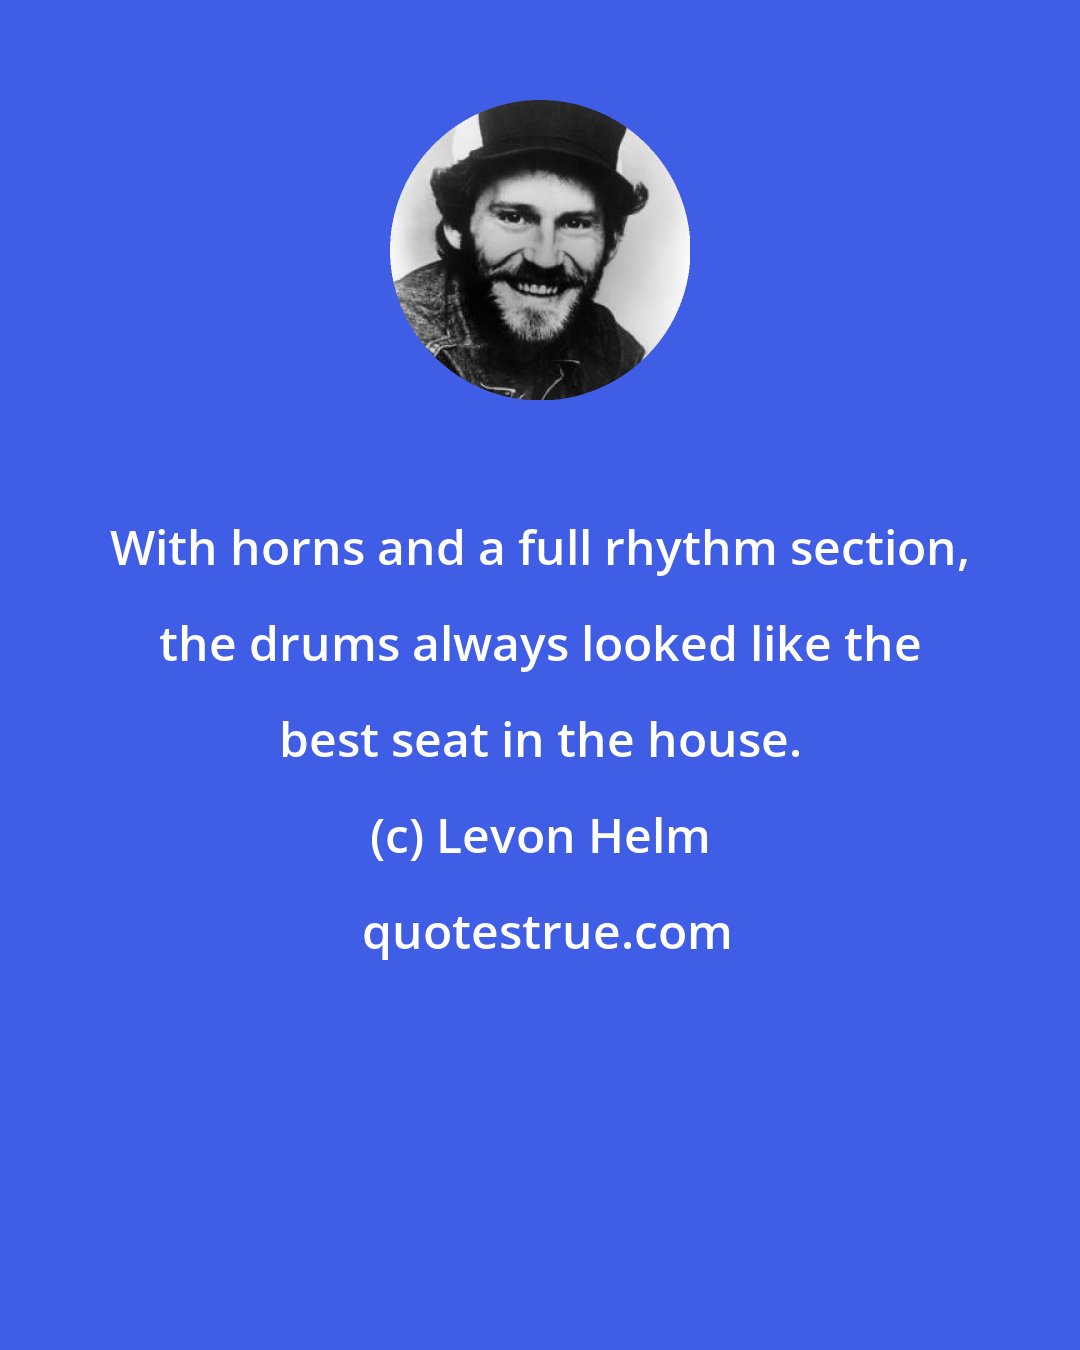 Levon Helm: With horns and a full rhythm section, the drums always looked like the best seat in the house.